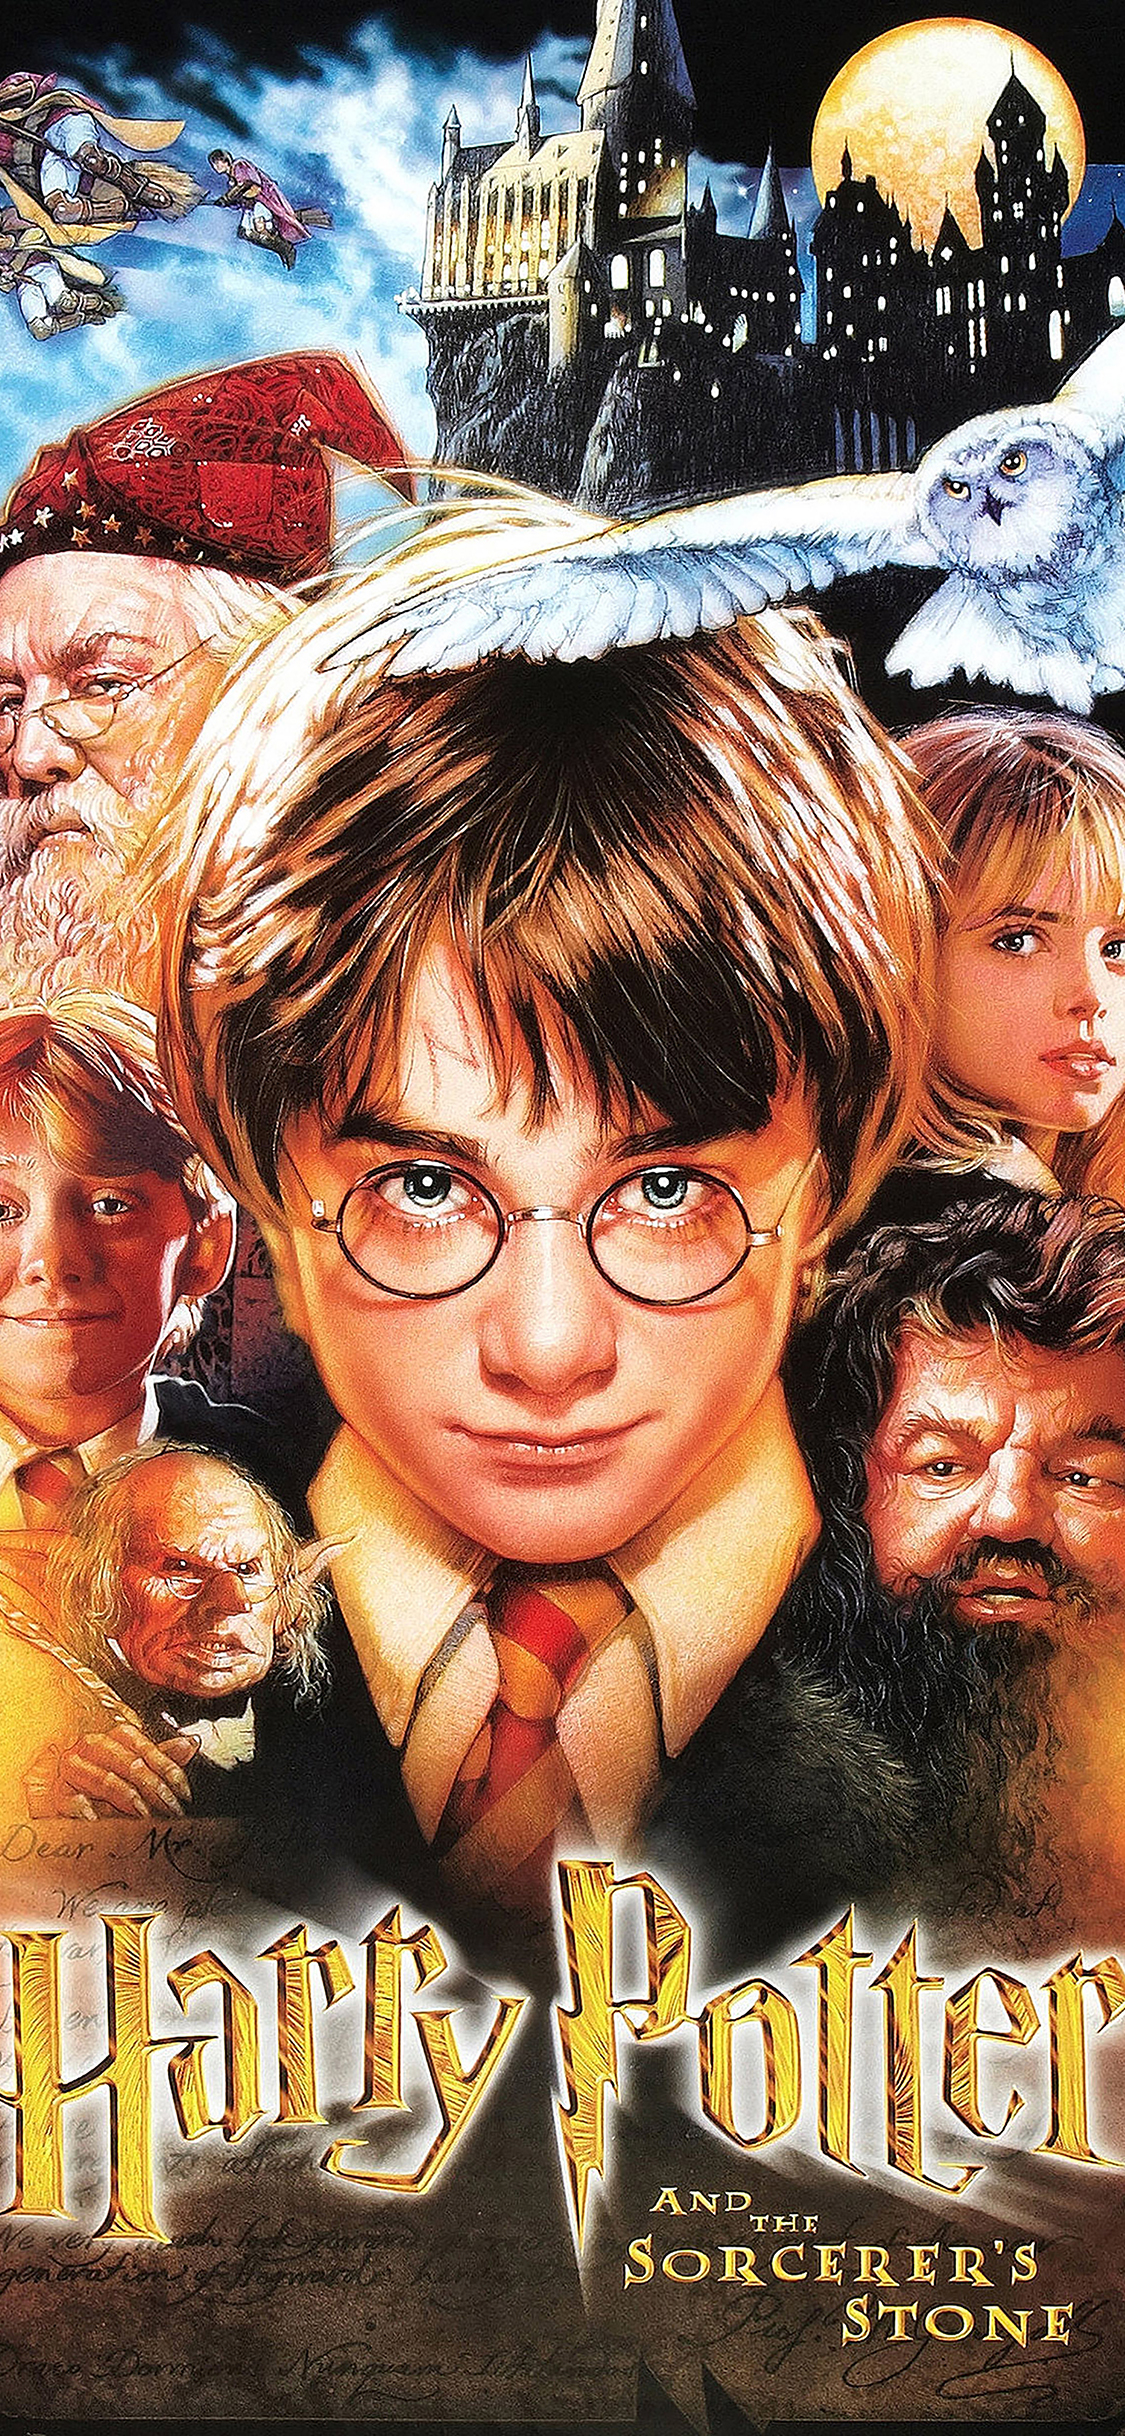 Harry Potter And The Philosopher's Stone Poster - HD Wallpaper 